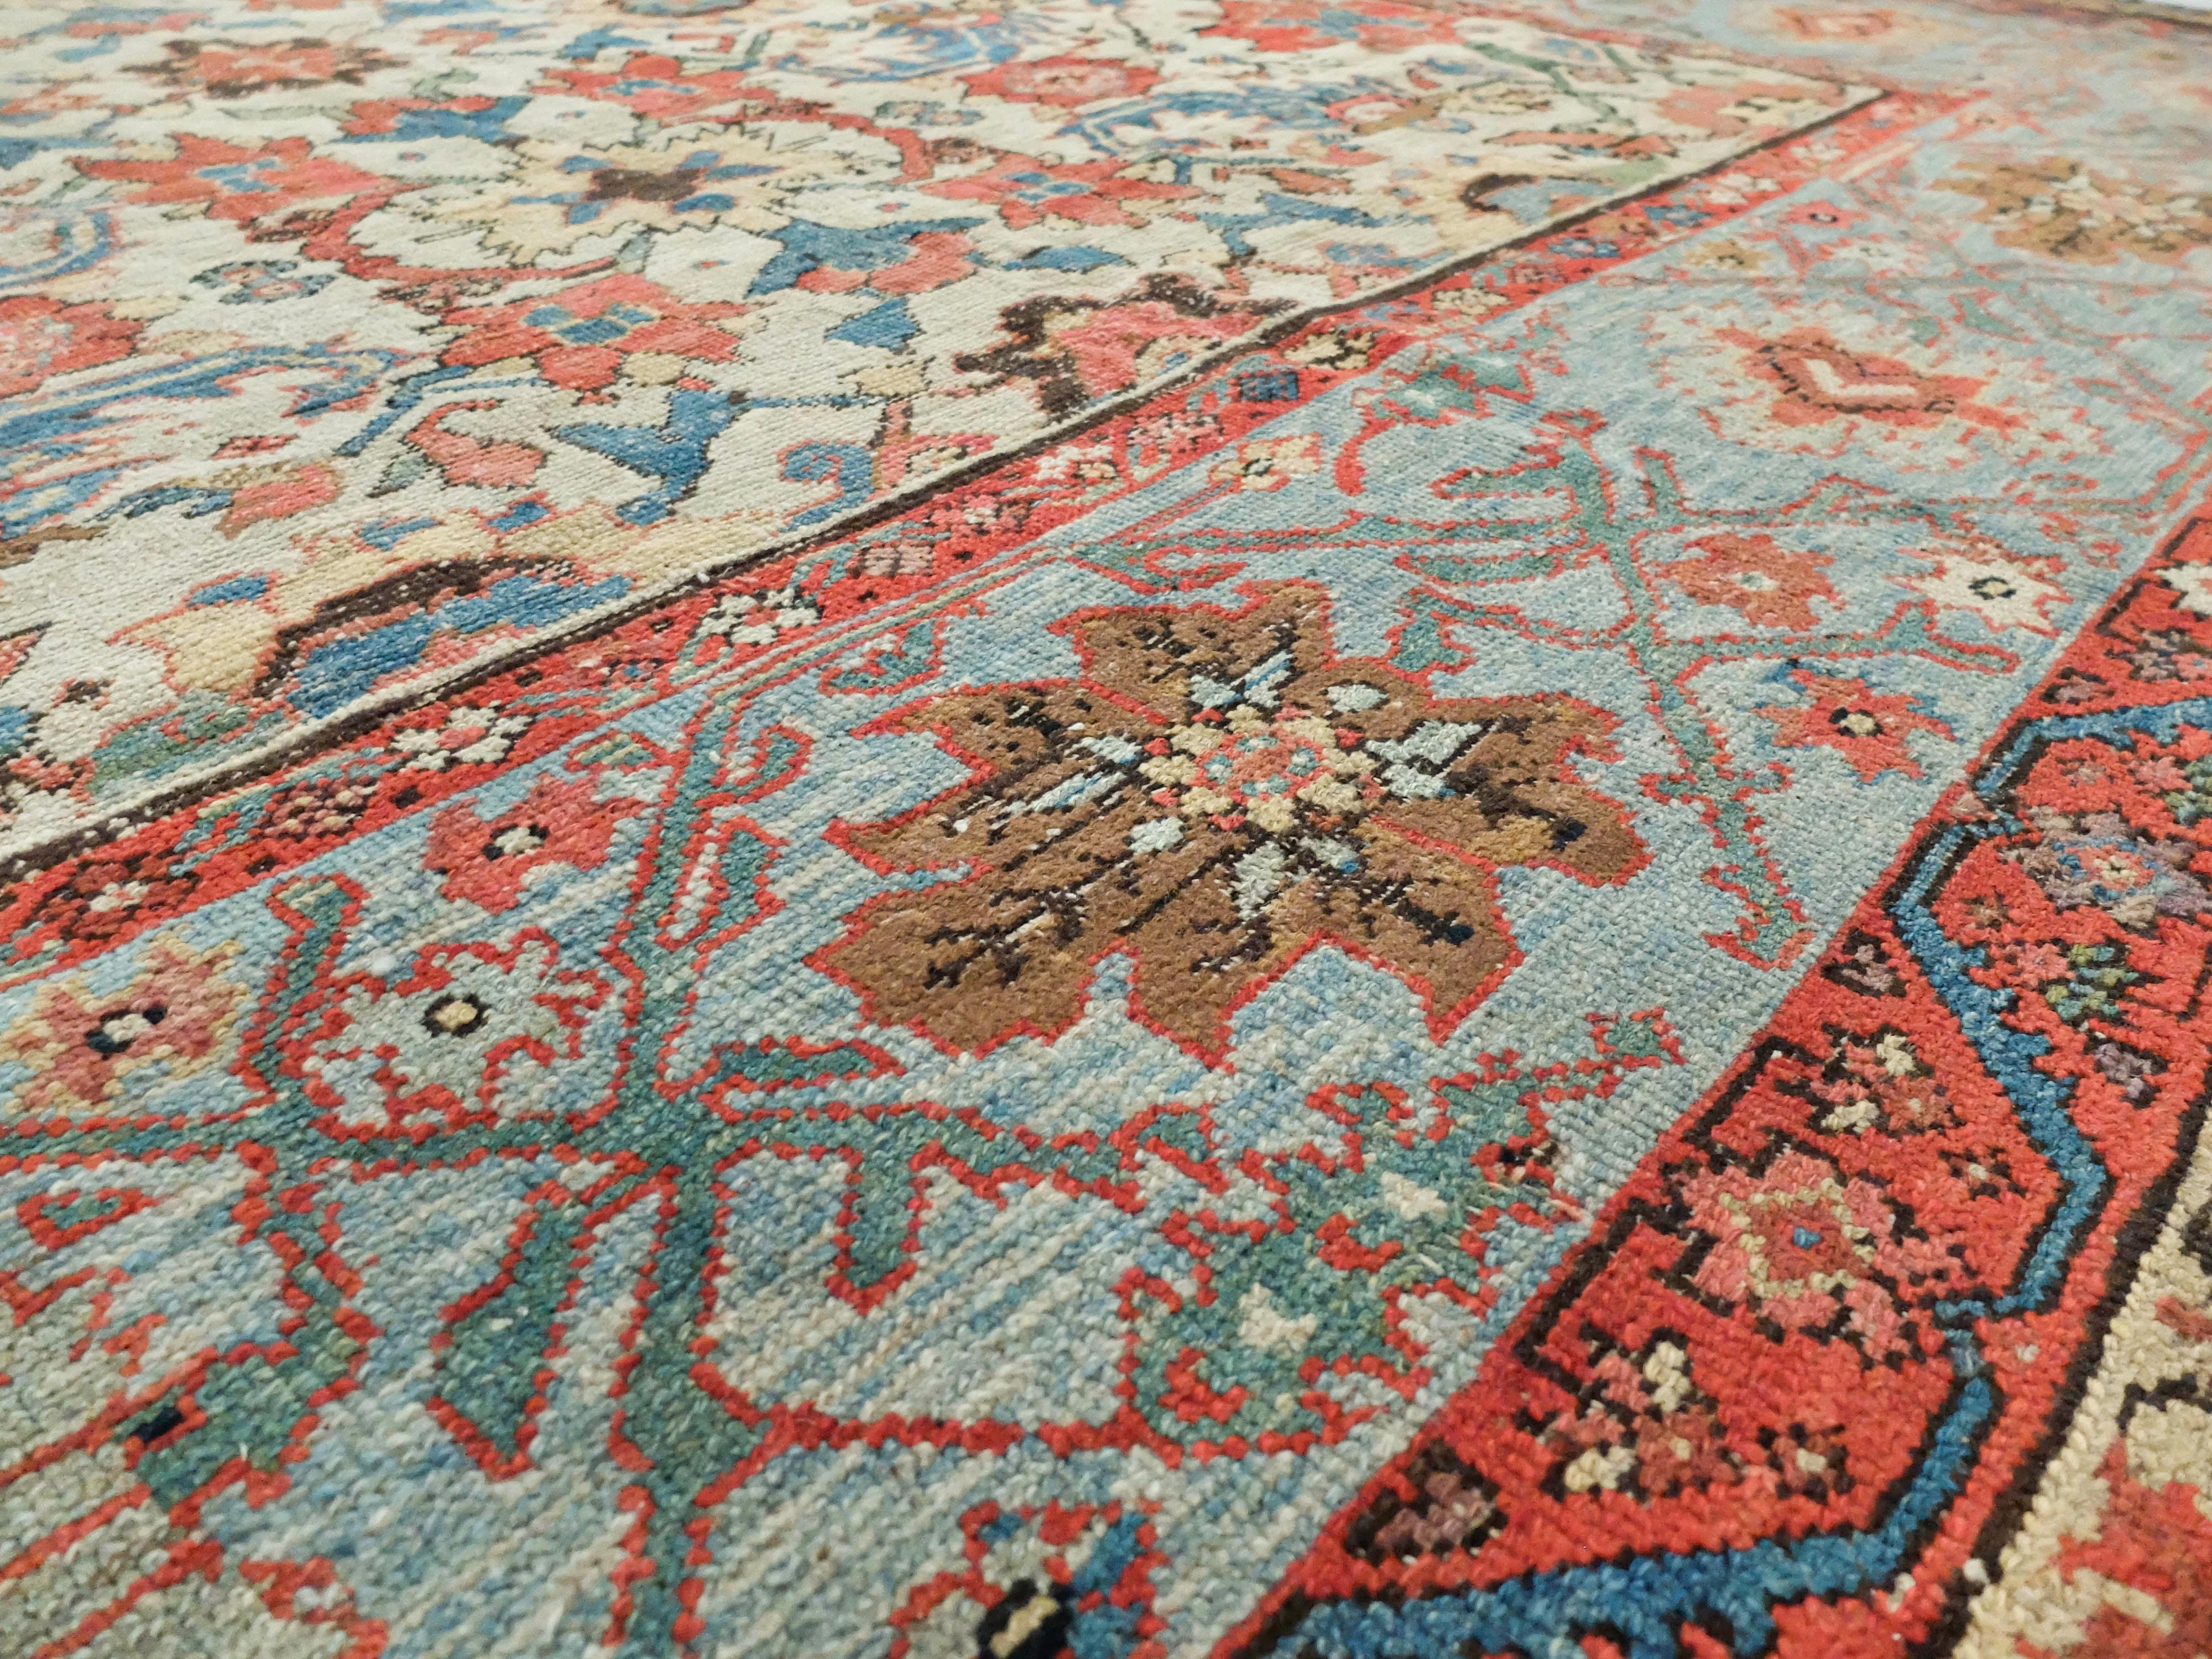 This is a Ziegler Mahal Antique rug made c. 1880s. This rug exhibits several different floral patterns both in the center field and on the surrounding borders. This rug is quite colorful however it is beautifully balance with its well used placement